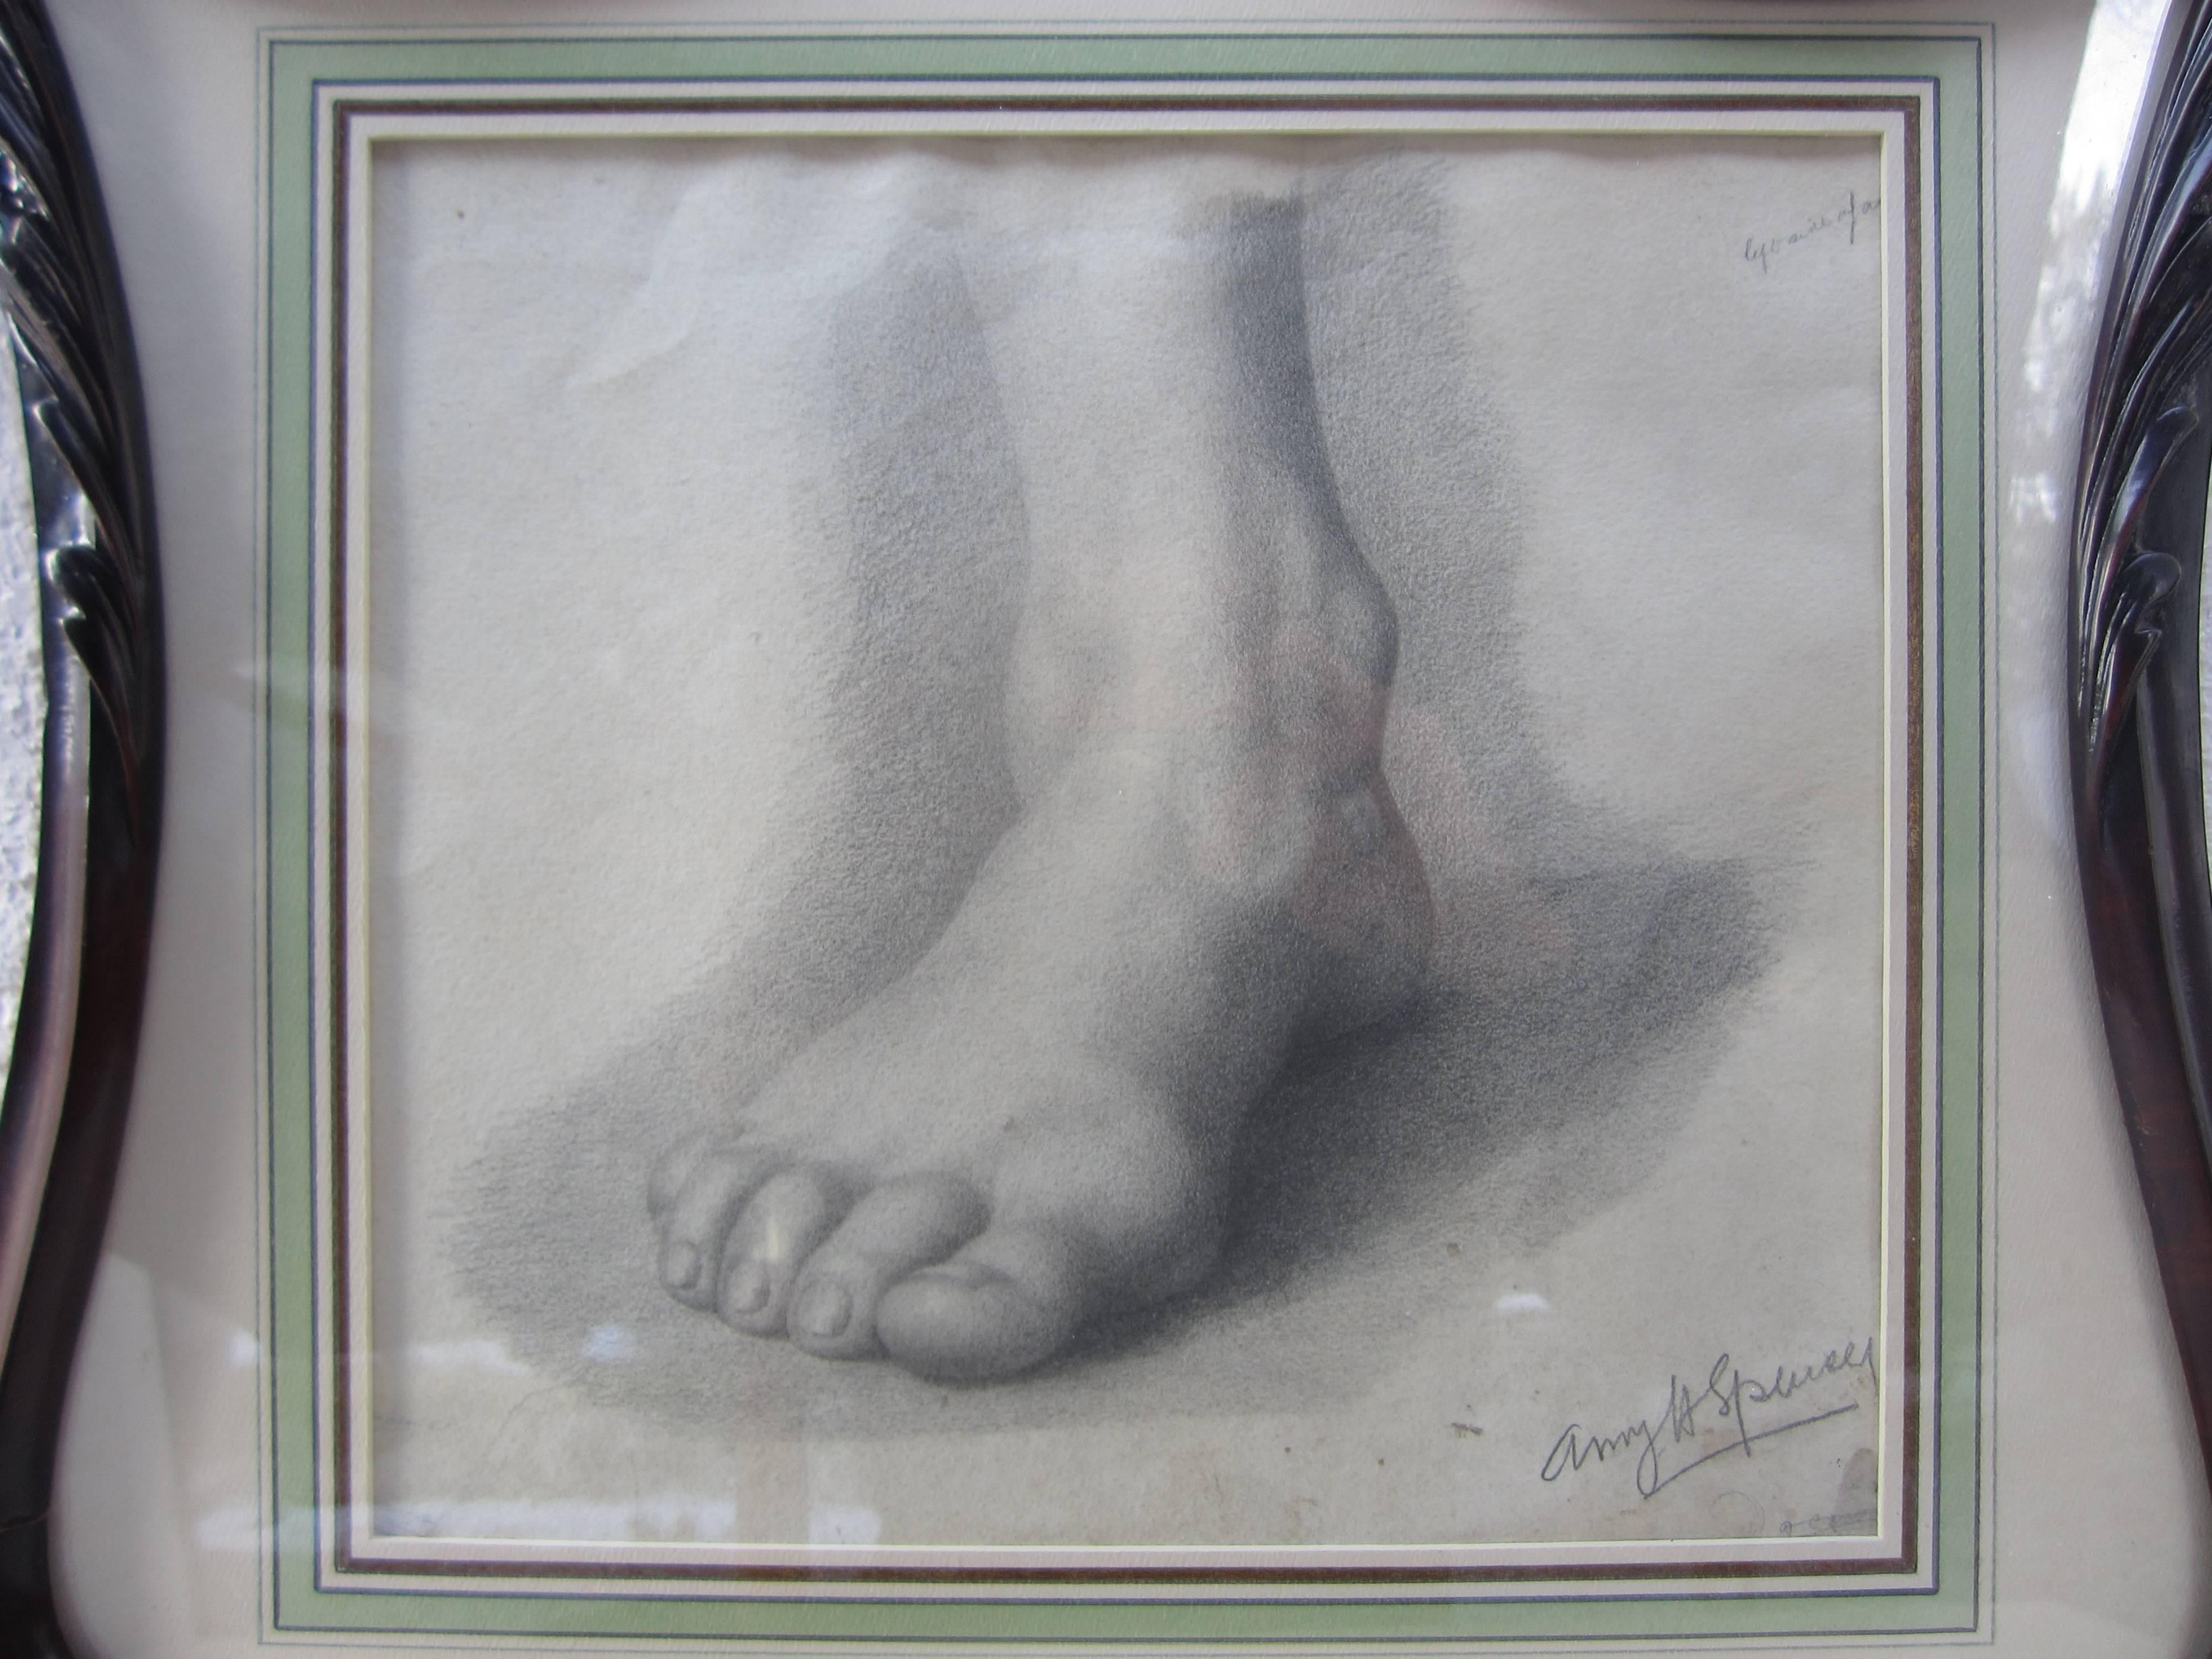 20th Century Pencil Study of a Foot